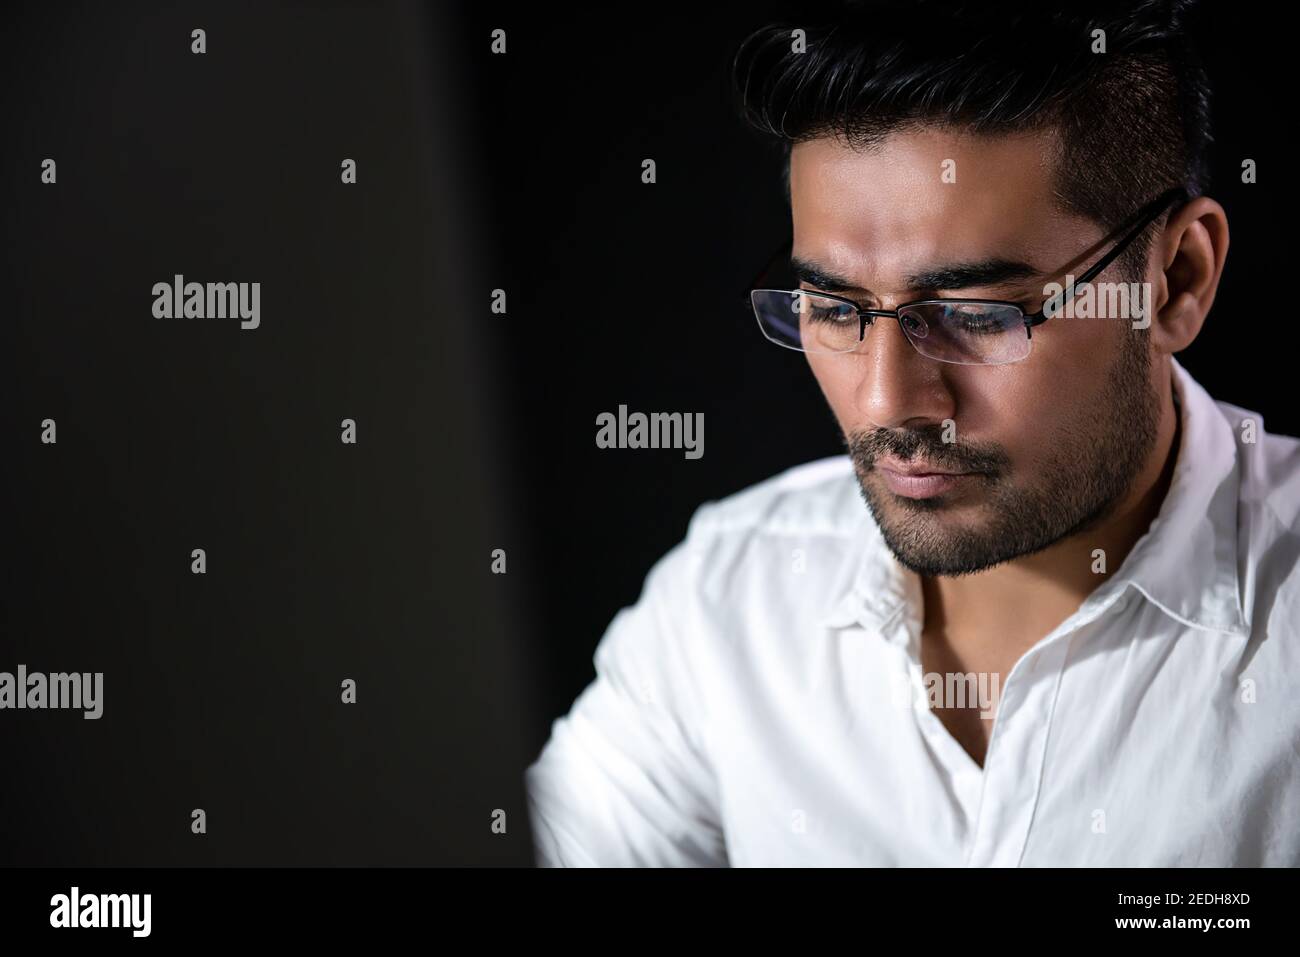 Handsome Asian businessman concentrating on working at night with serious face Stock Photo